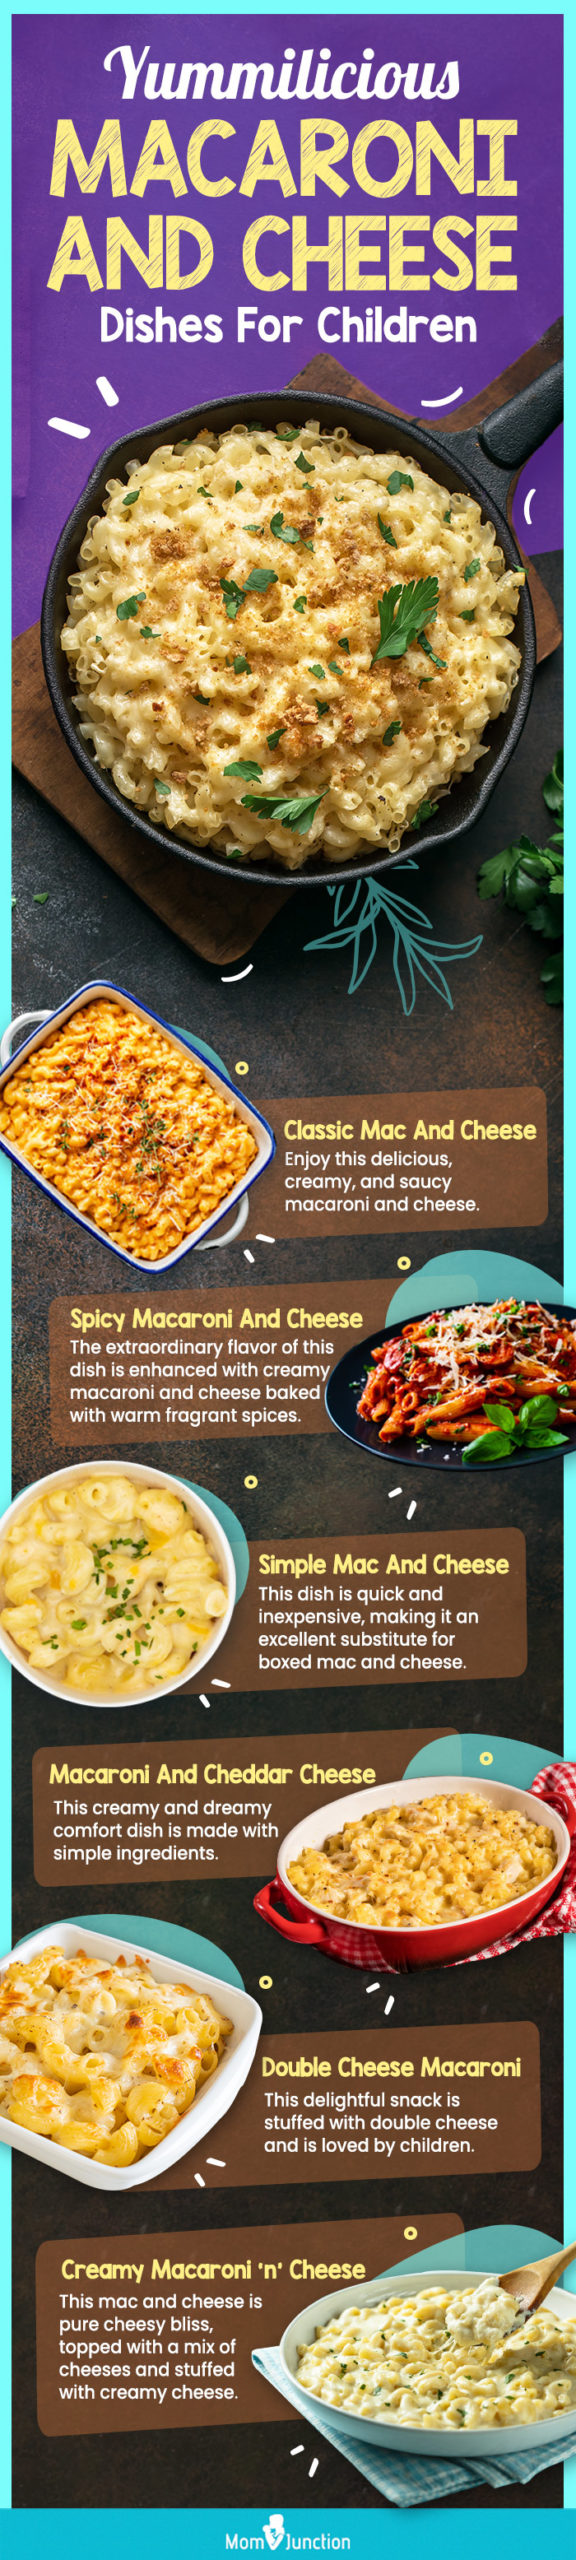 yummilicious macaroni and cheese dishes for children (infographic)